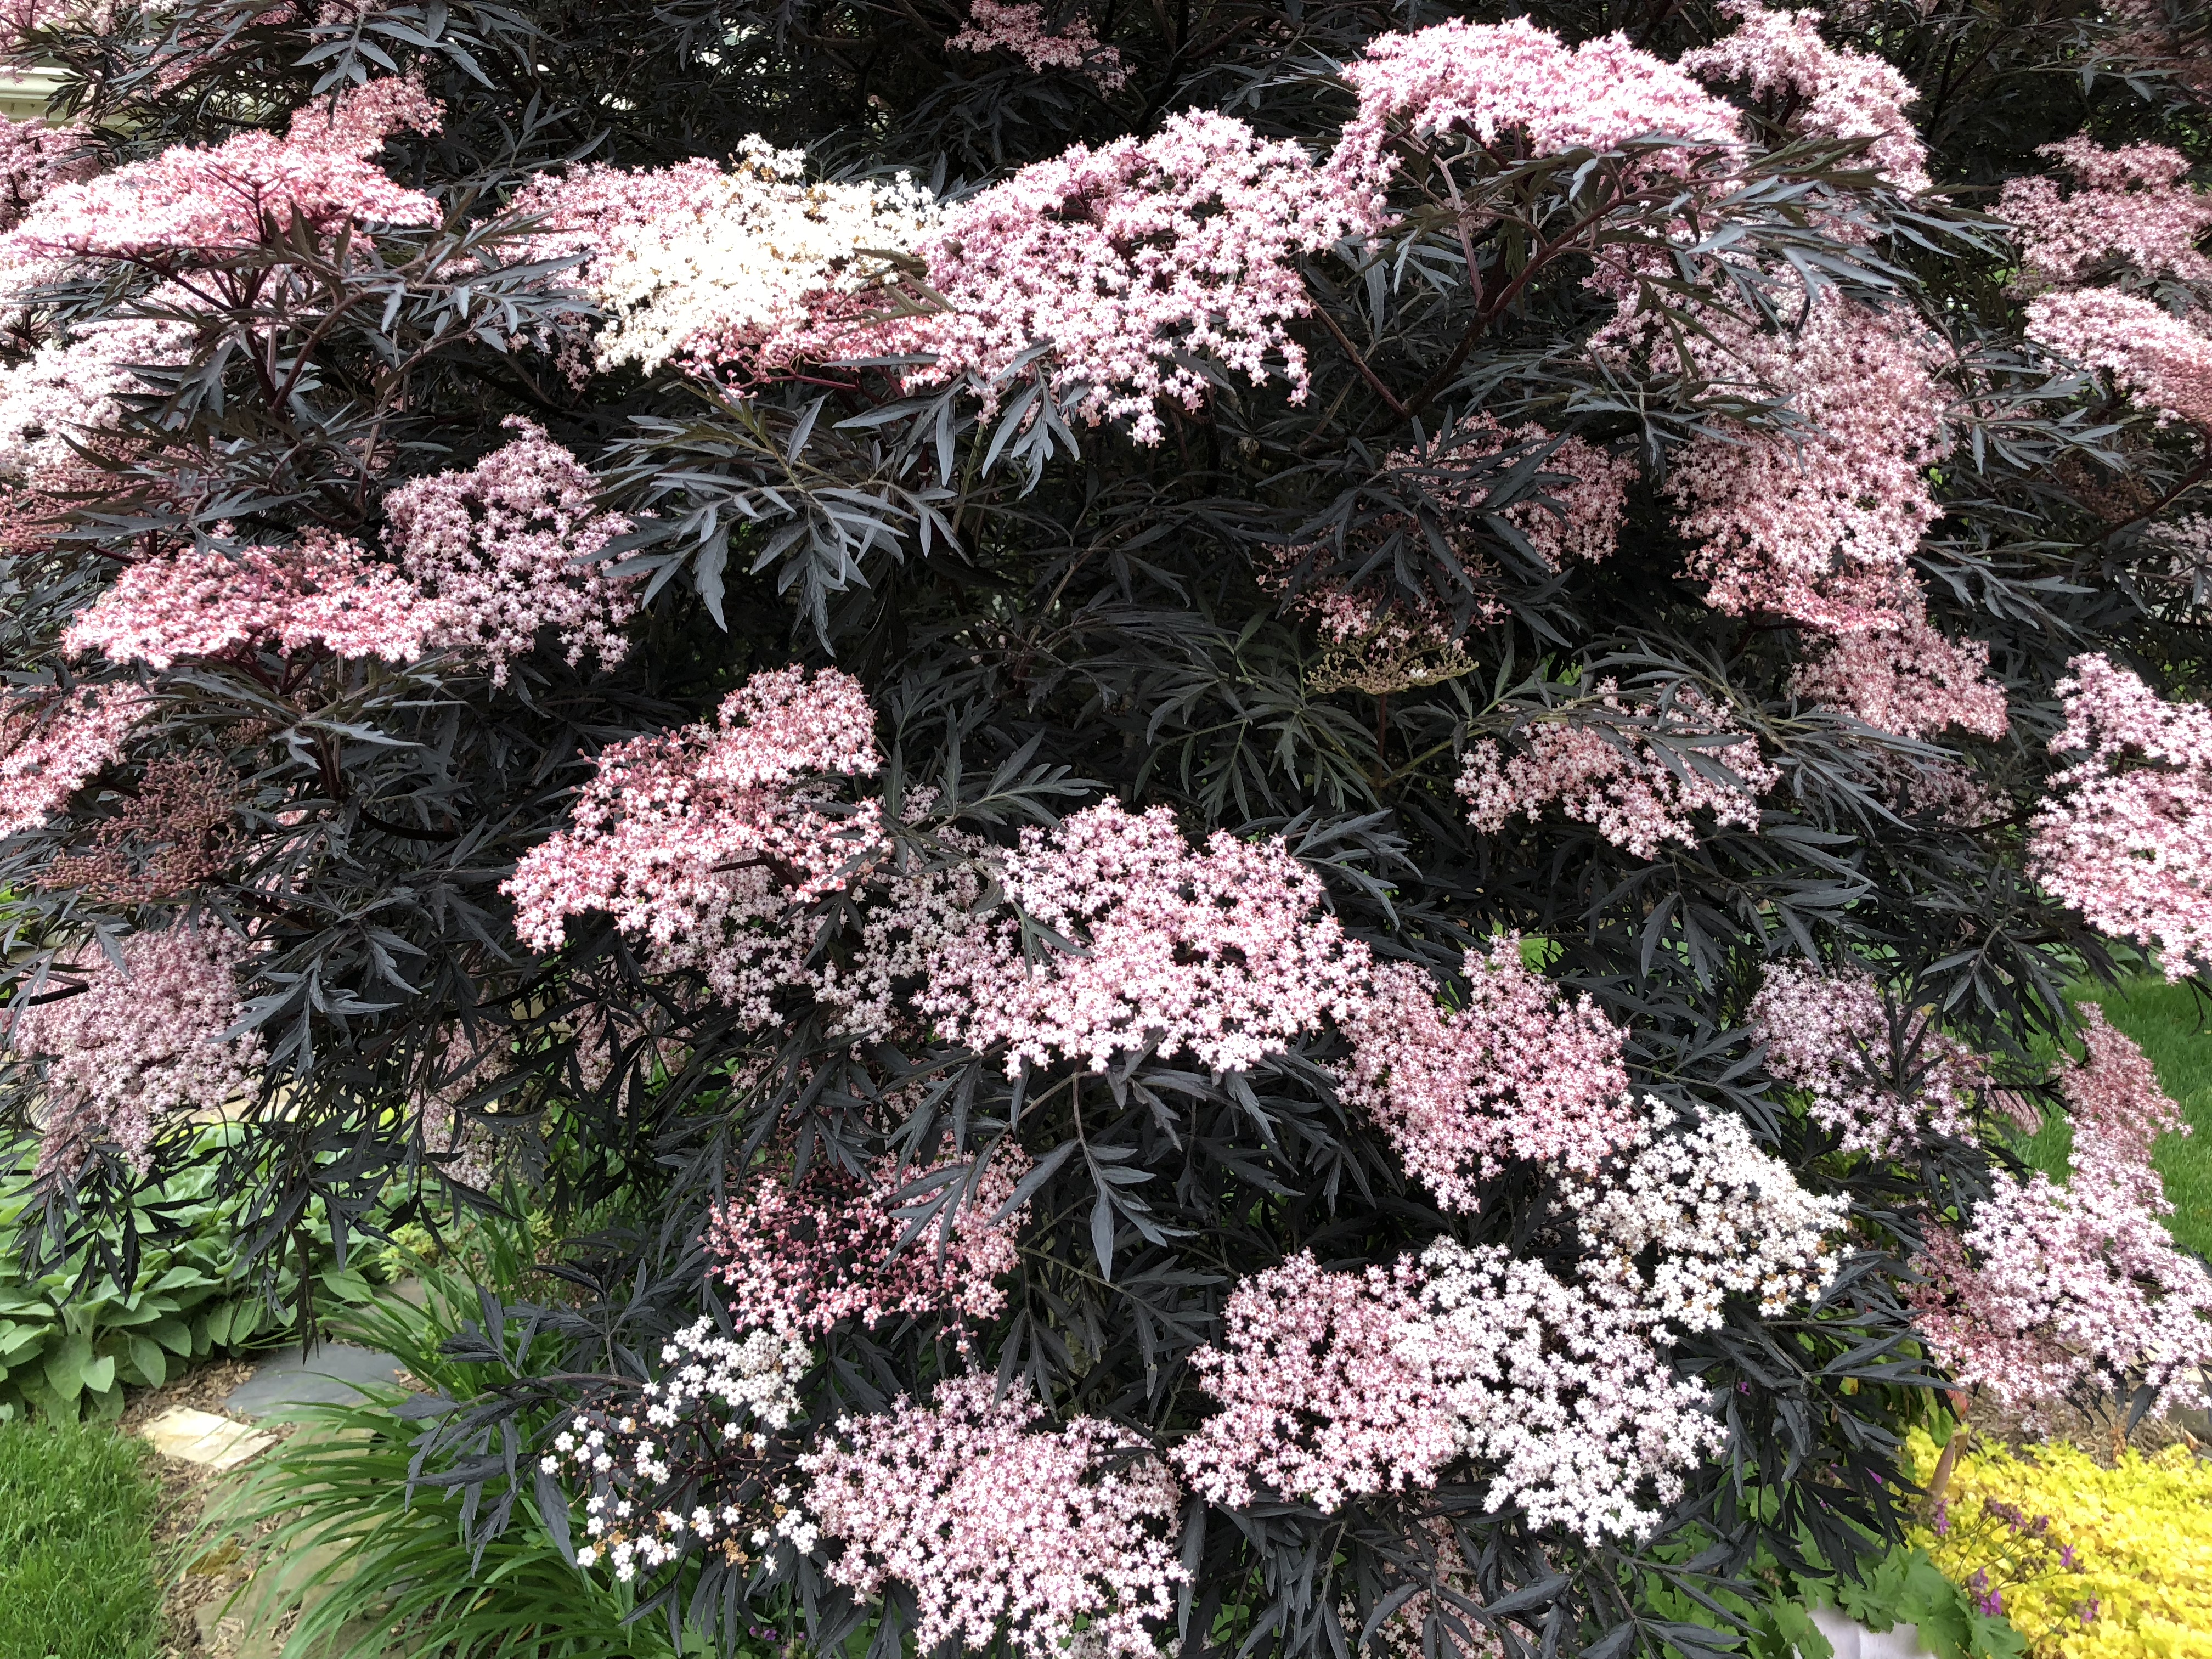 light-pink flowers with dark-green leaves and stems